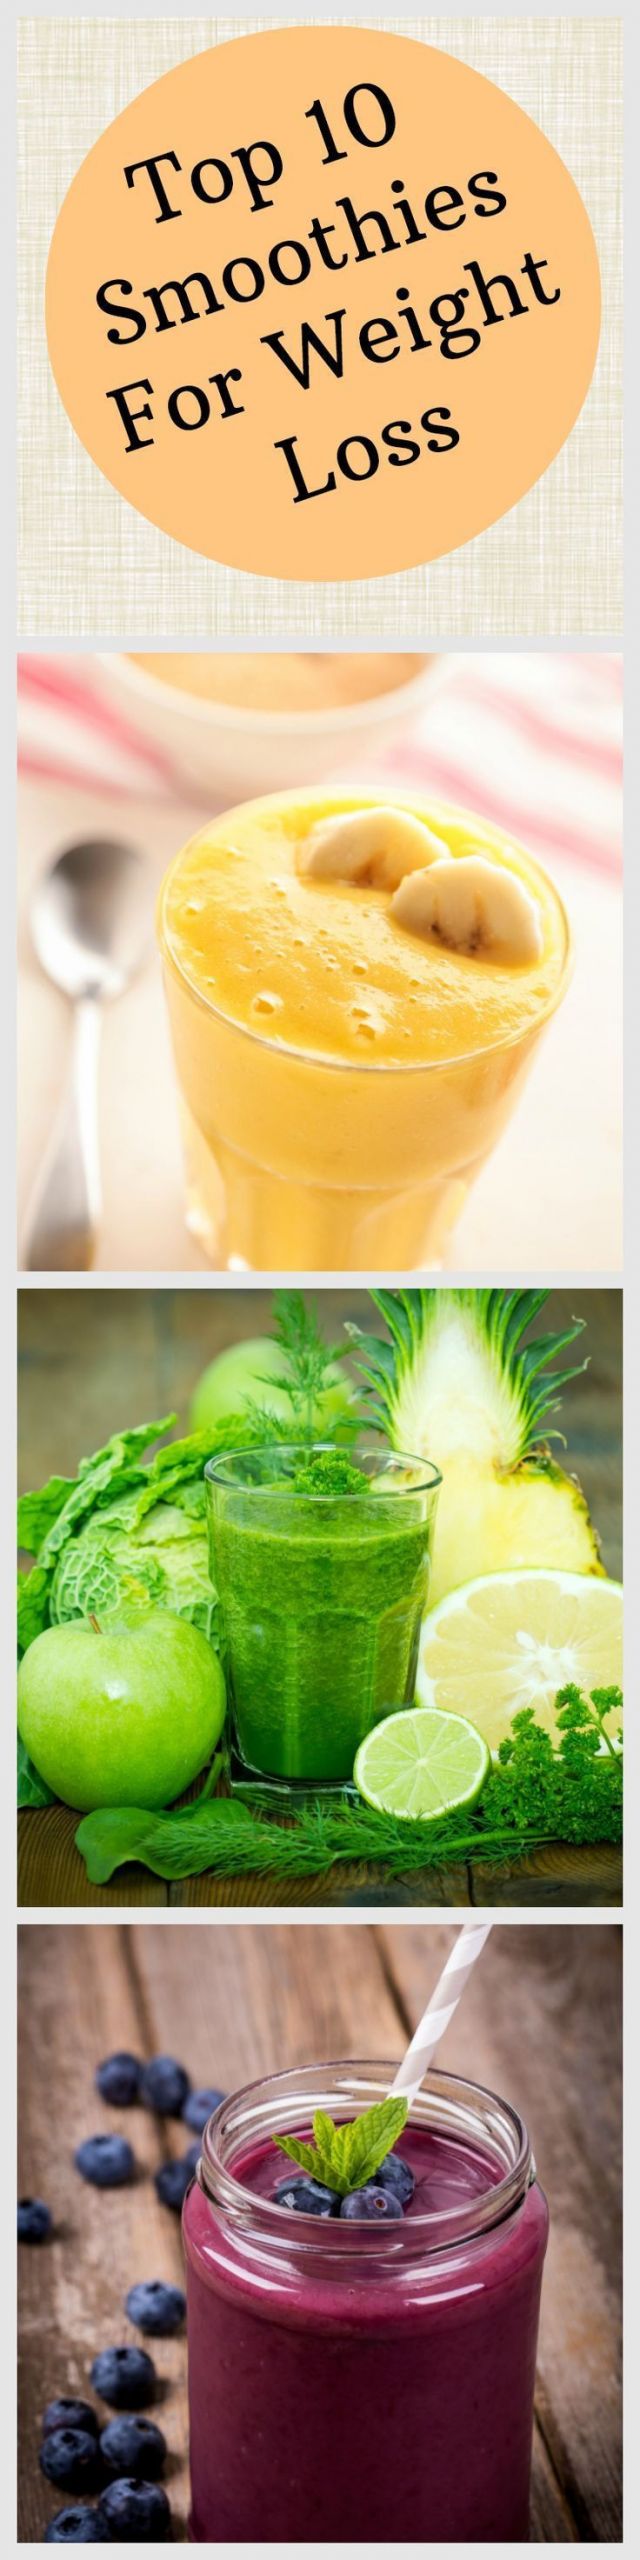 Low Calorie Weight Loss Smoothies
 21 Weight Loss Smoothies With Recipes And Benefits